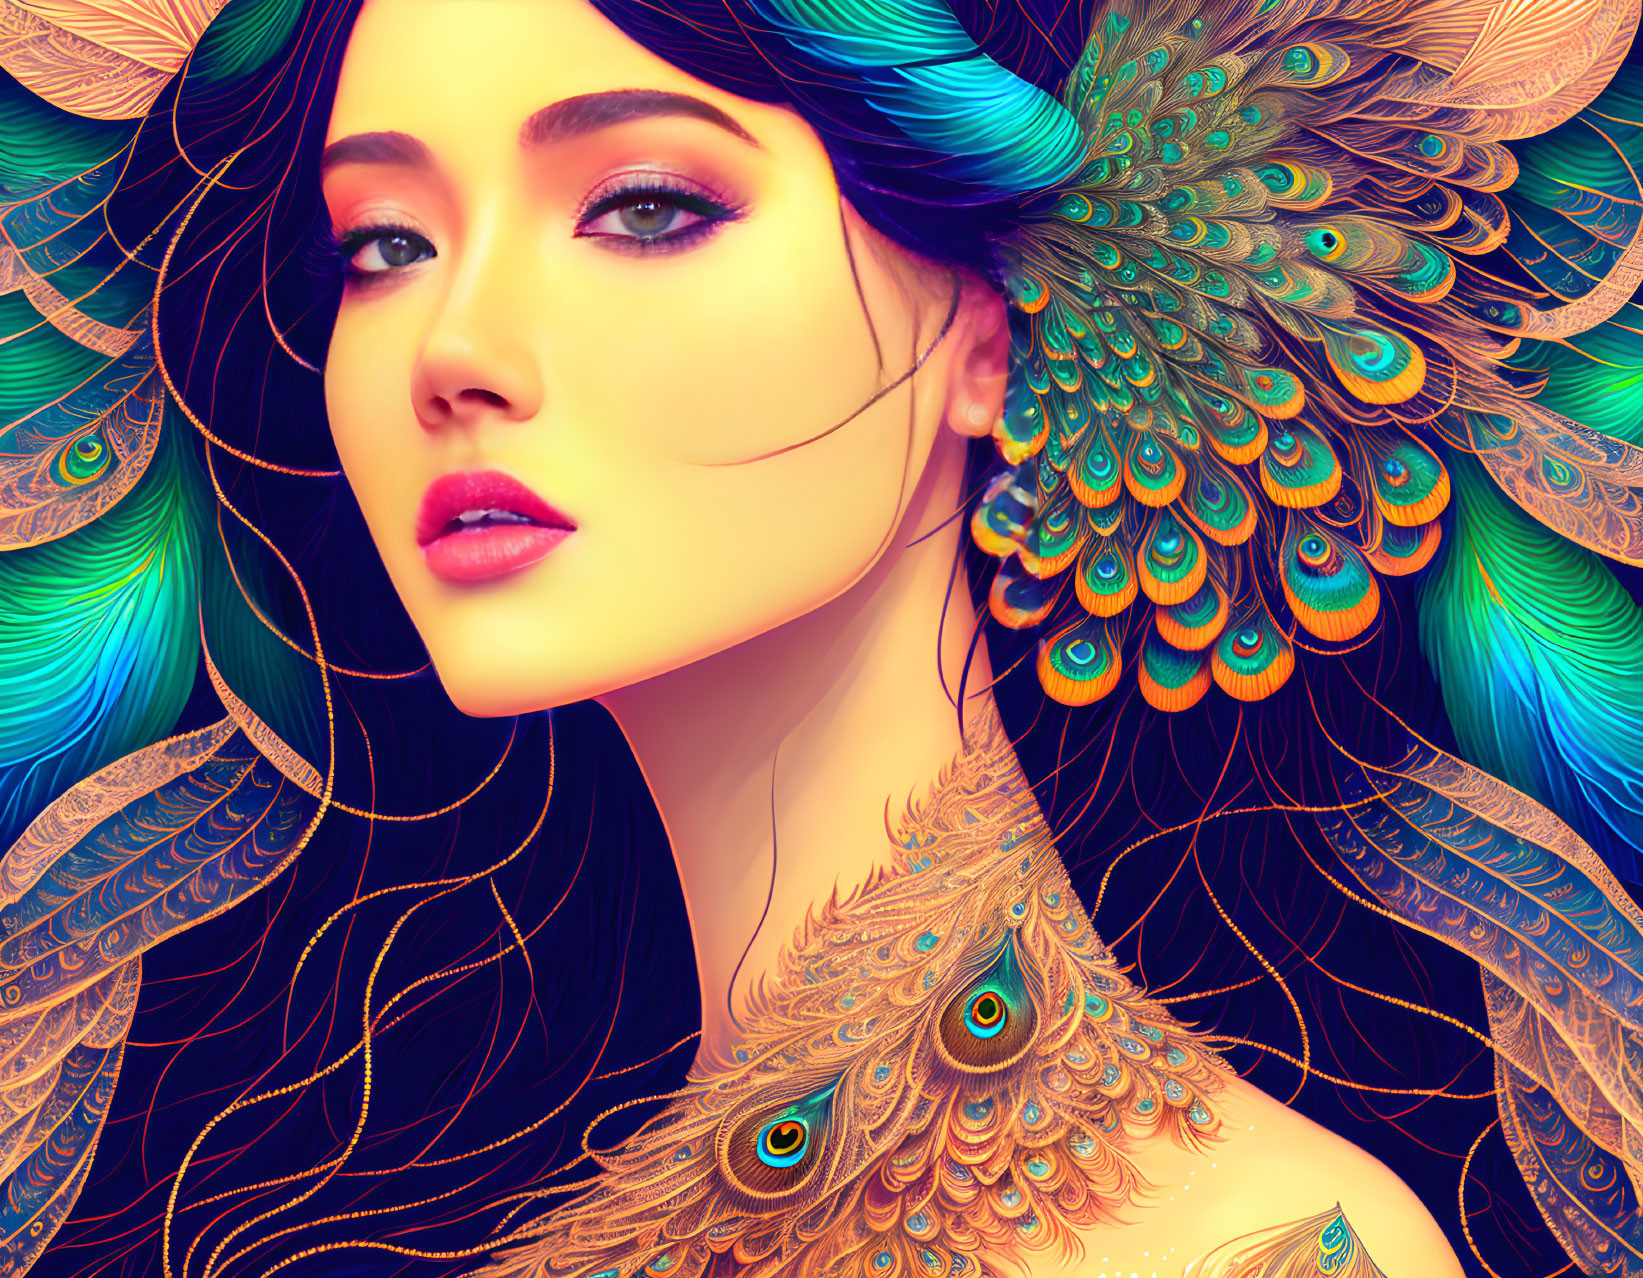 Vibrant peacock feather woman illustration with rich colors